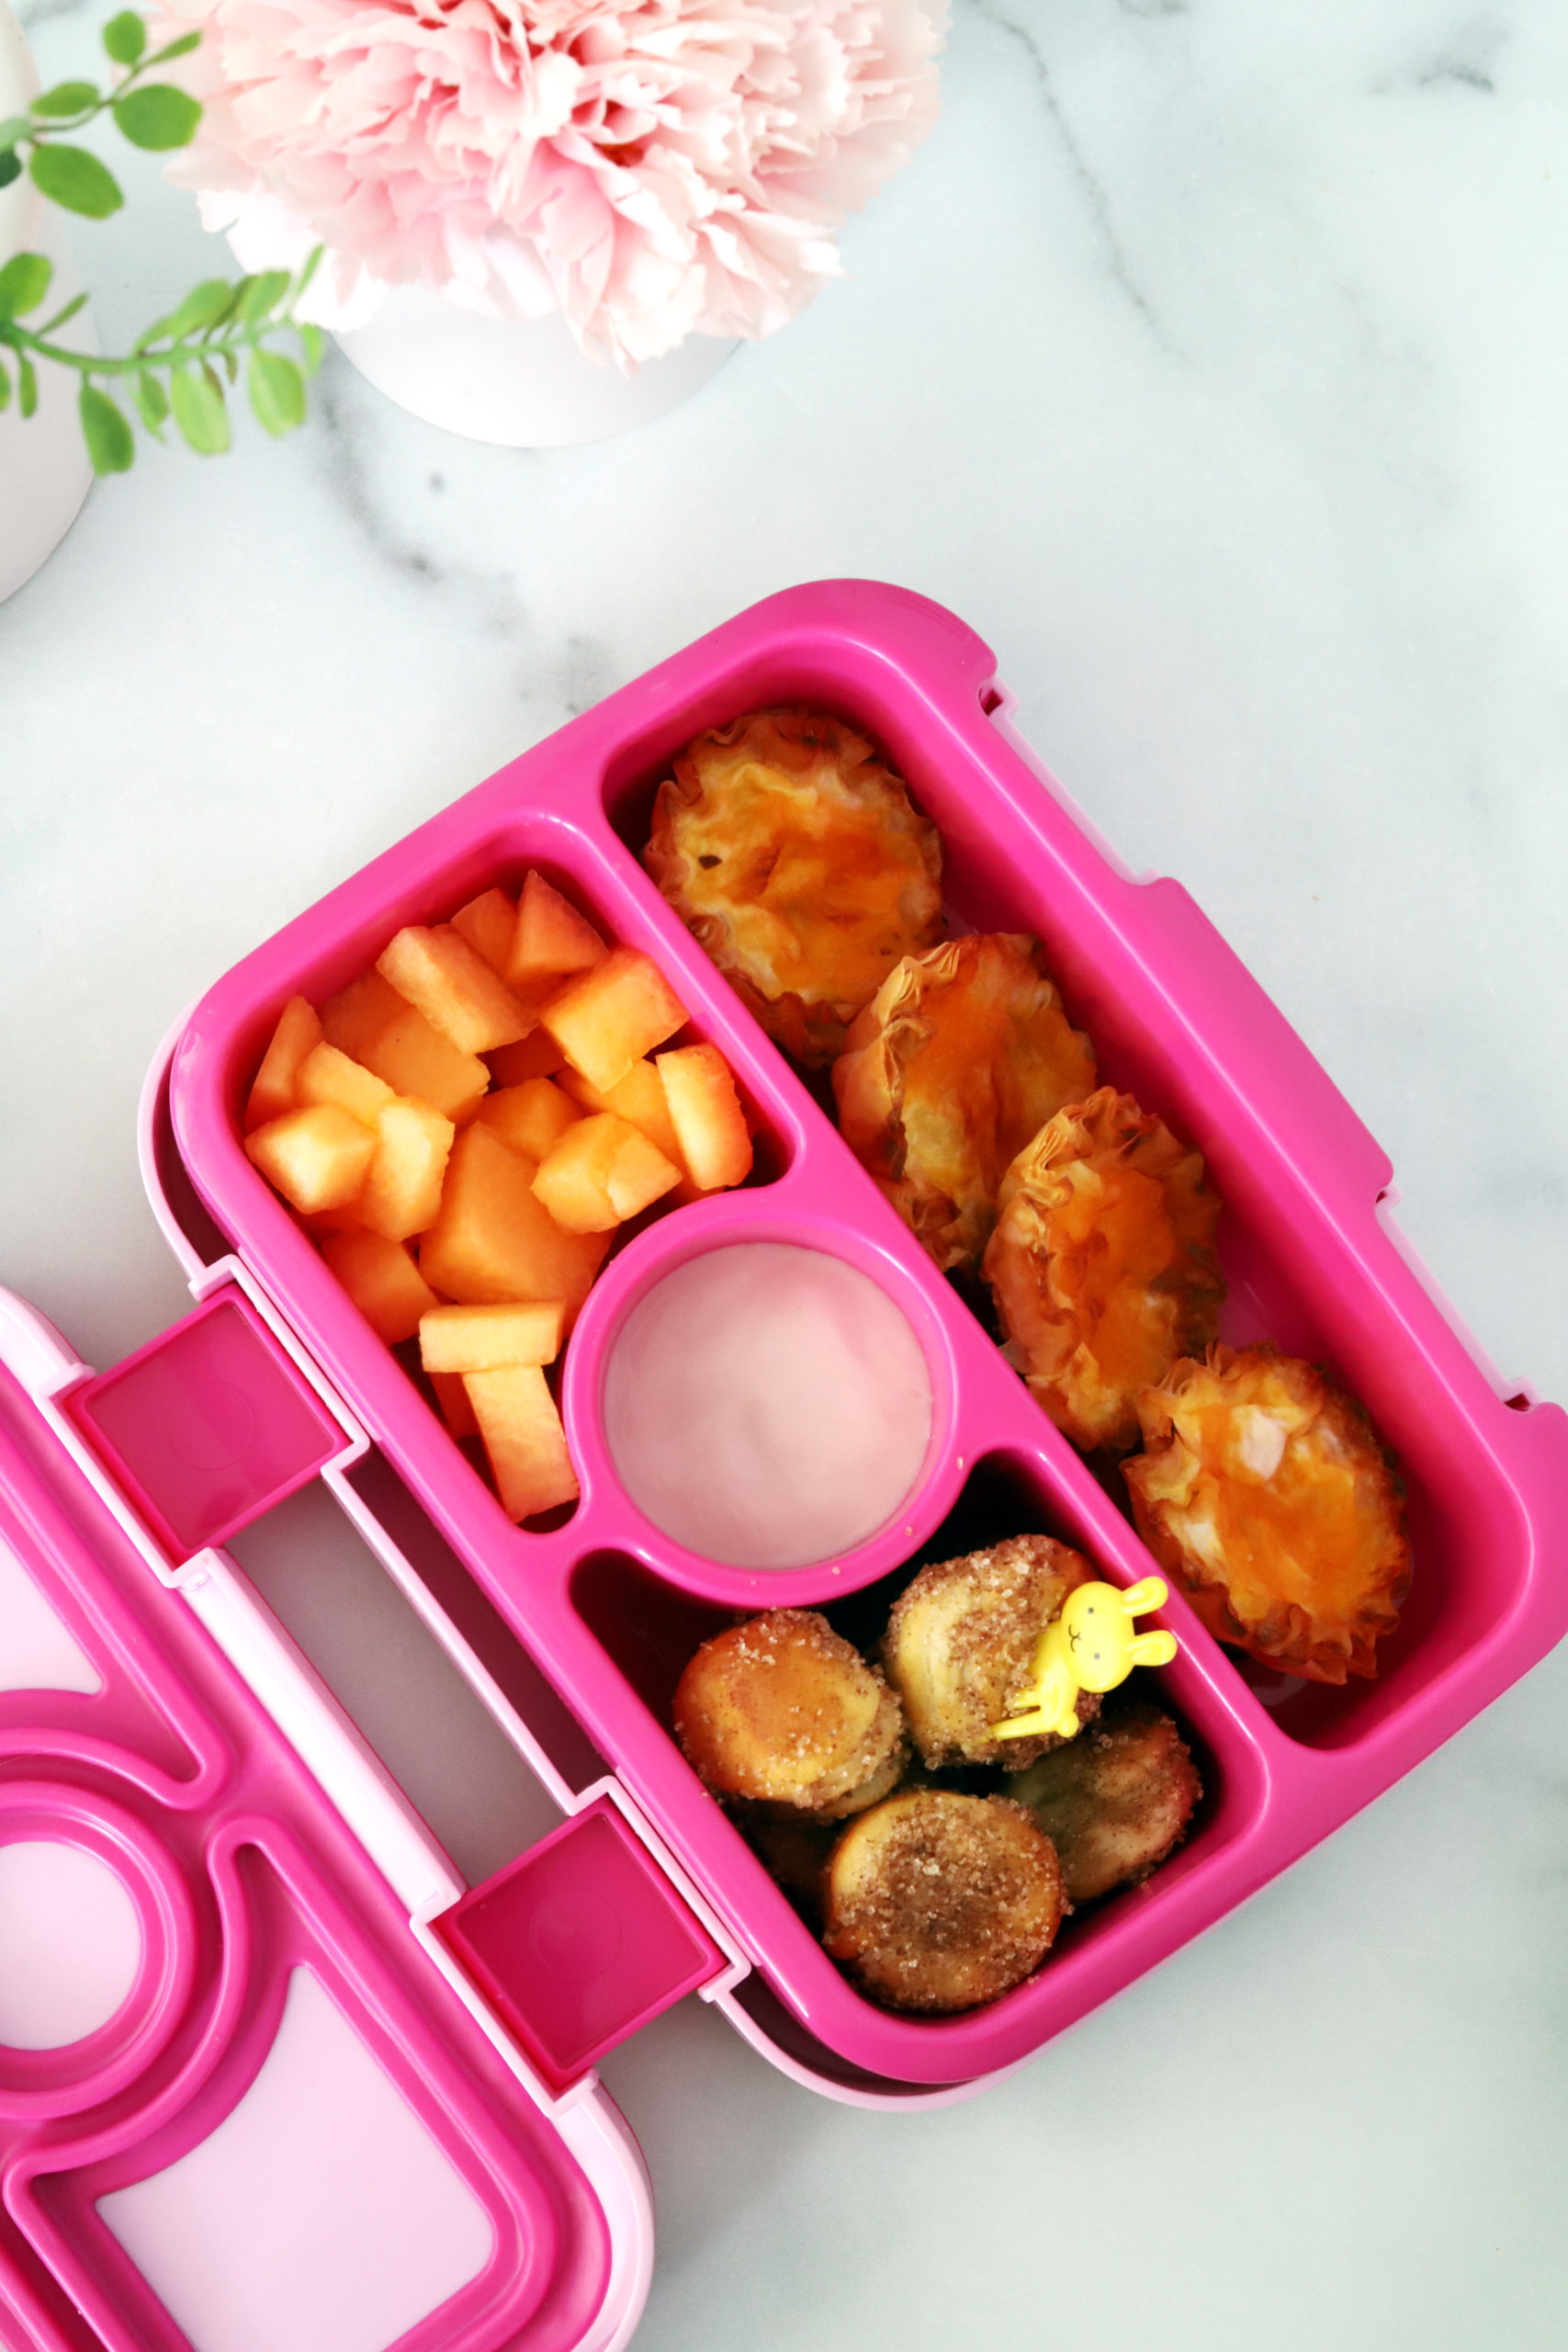 Baloray Lunch Containers Boxes in Home,Lunch Containers,Lunch Containers for Kids,Lunch Containers with Dividers,Bento Containers,Kids Thermo Divided